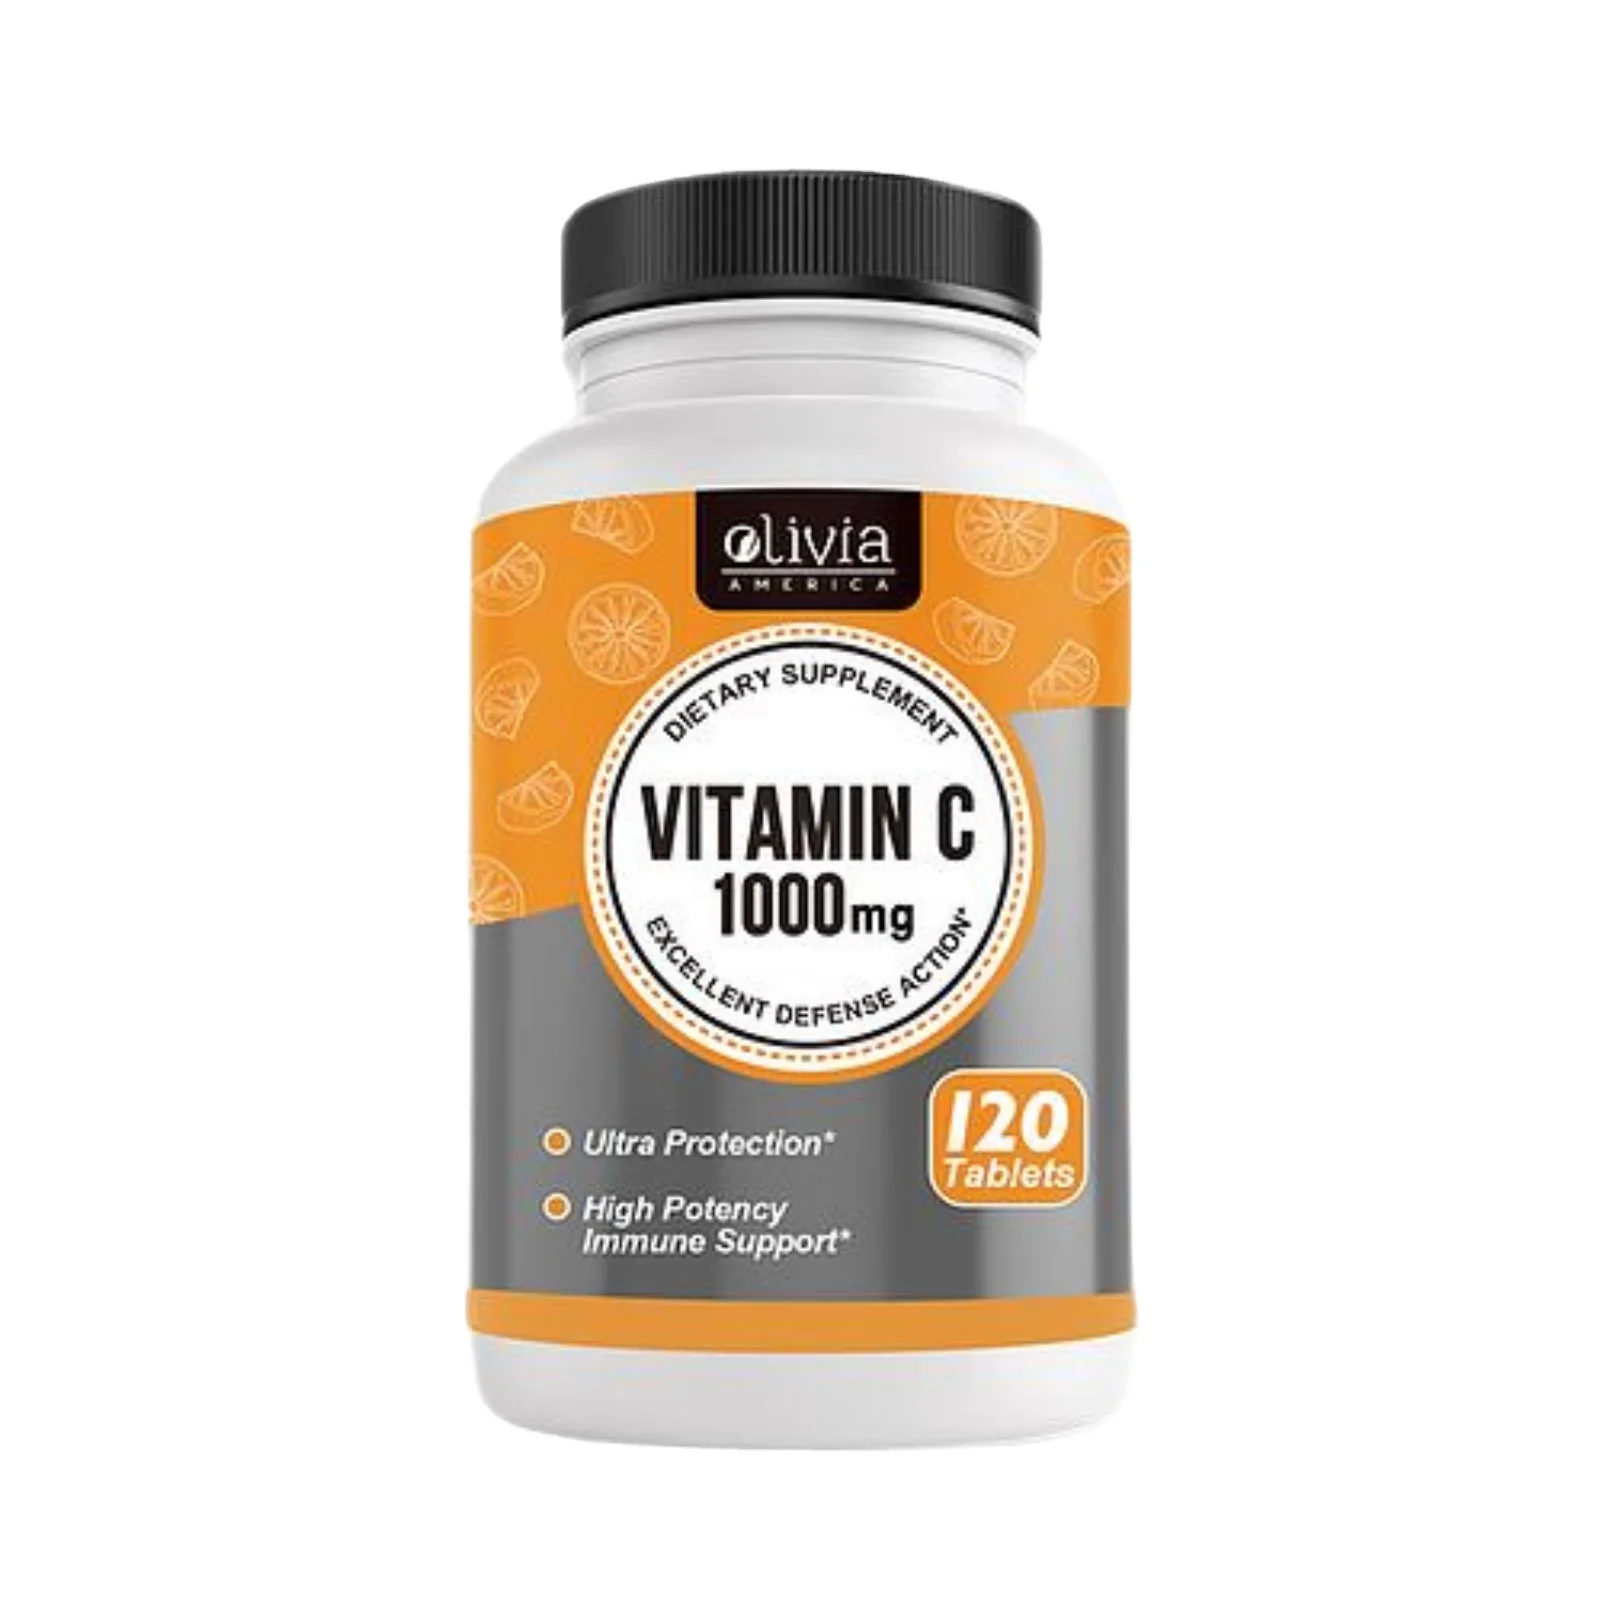 

Vitamin C Chewable Tablets 1000mg Olivia America Nutritional Immune Support Vitamins and Supplements (Case Pack of 12)